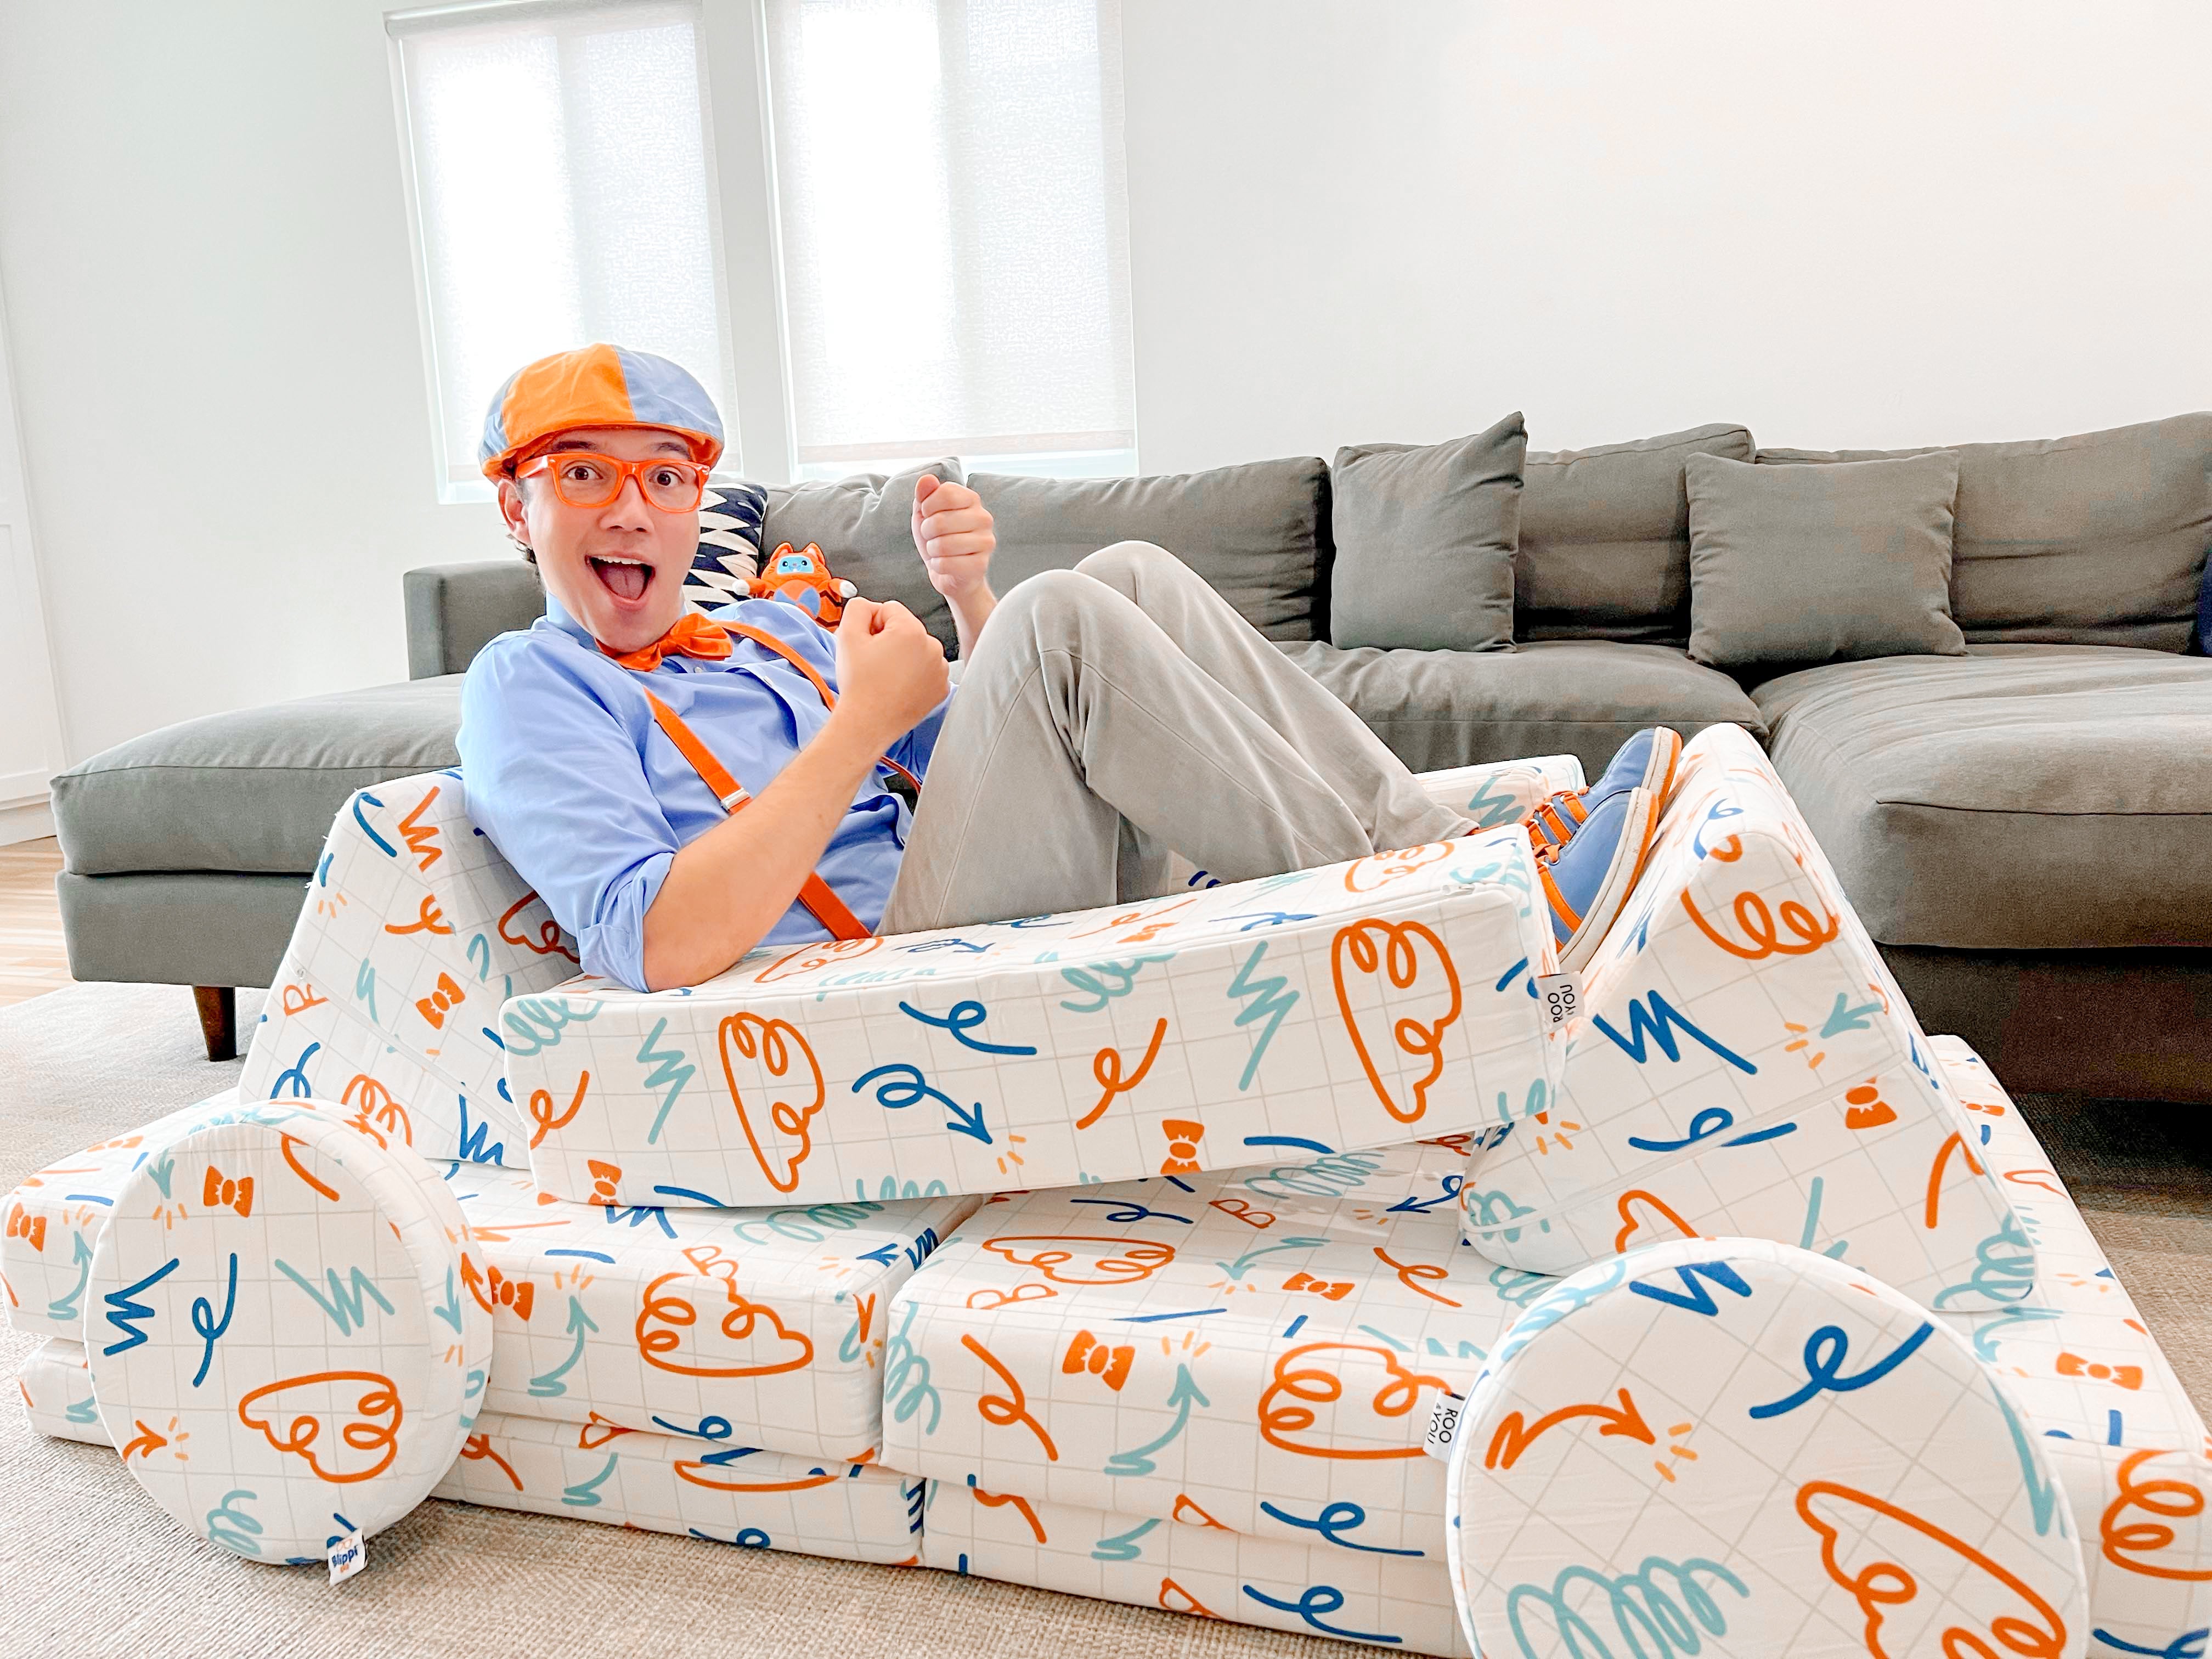 Blippi driving his car made from his play couch